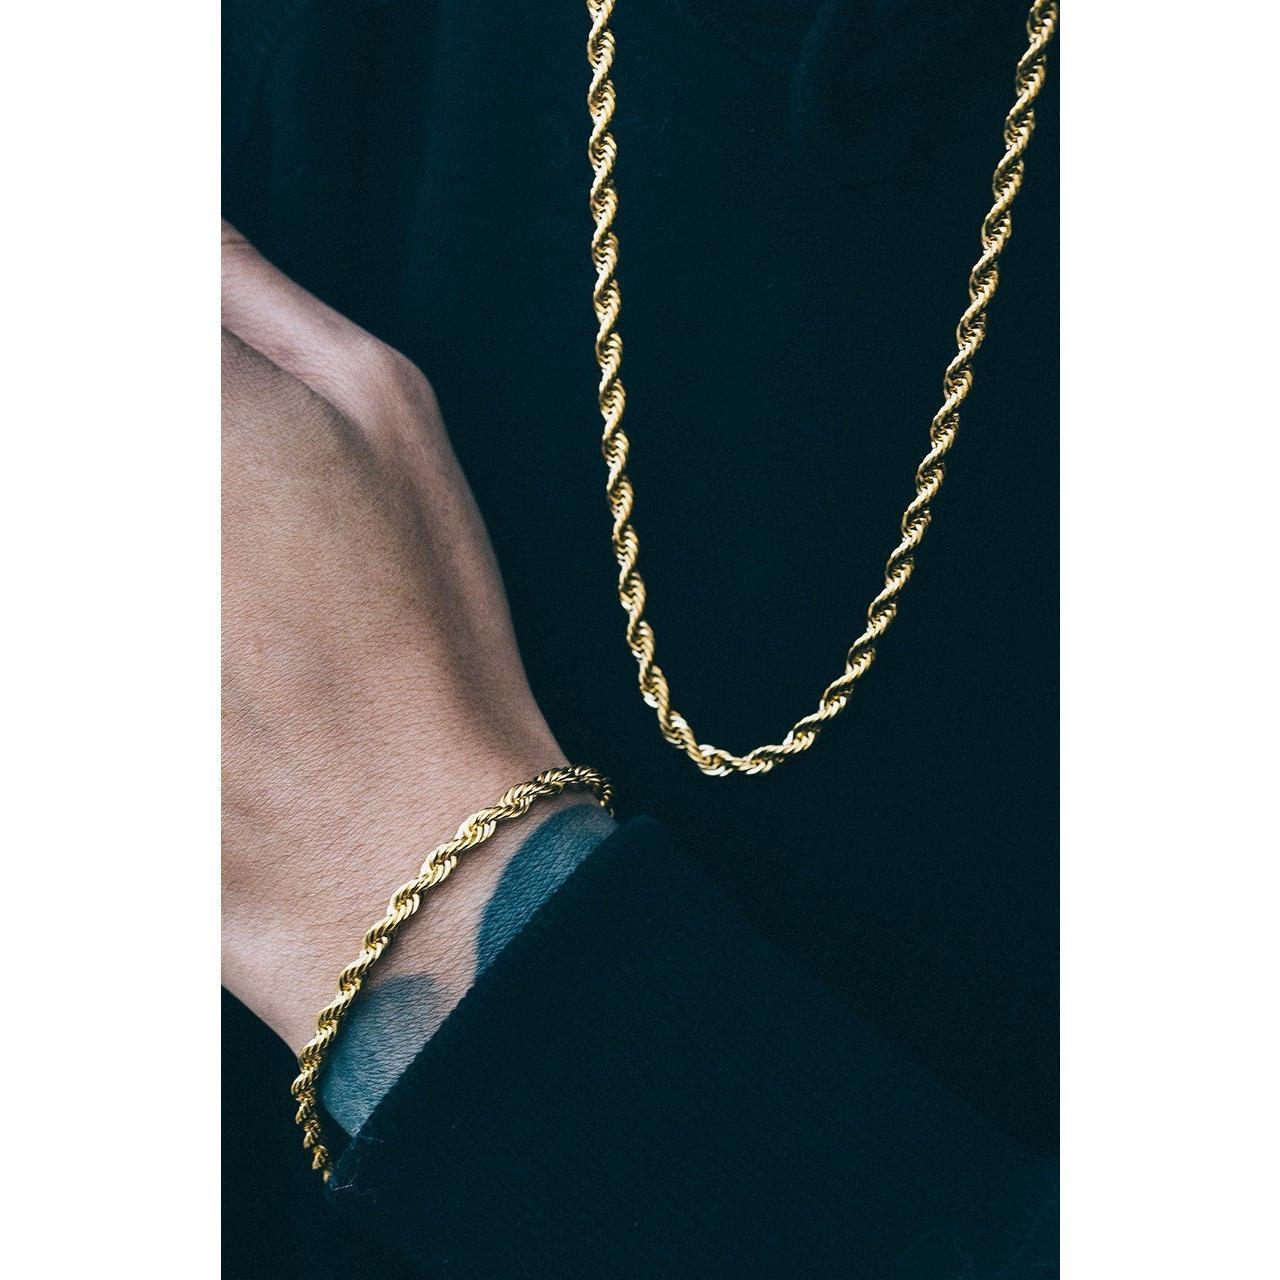 Mister Rope Chain - Mister SFC - Fashion Jewelry - Fashion Accessories